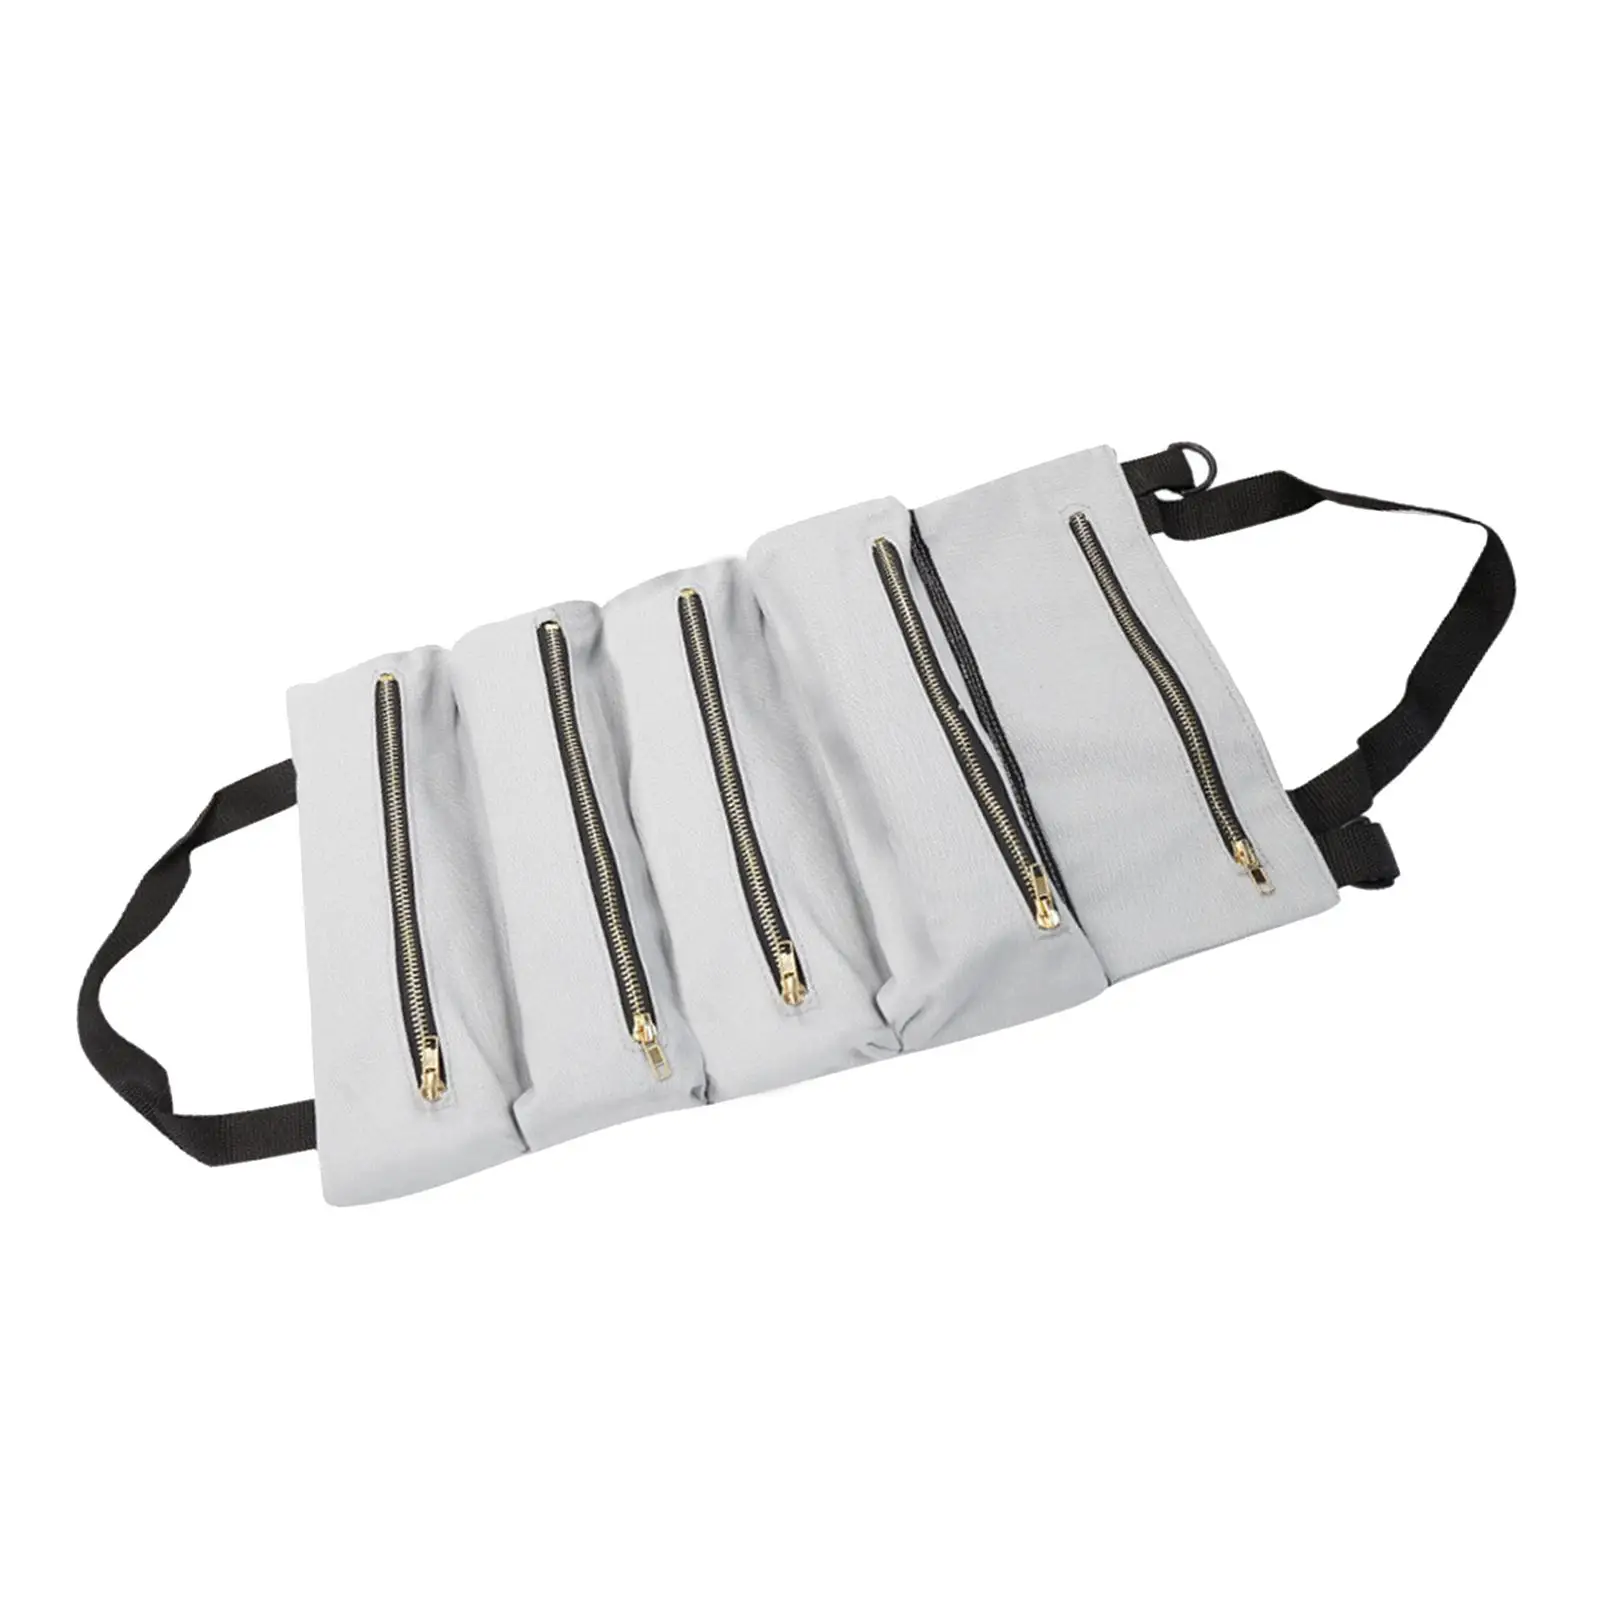 Roll up Tool Bag Foldaway Wrench Tools Pouch Small Tool Bag for Plumber